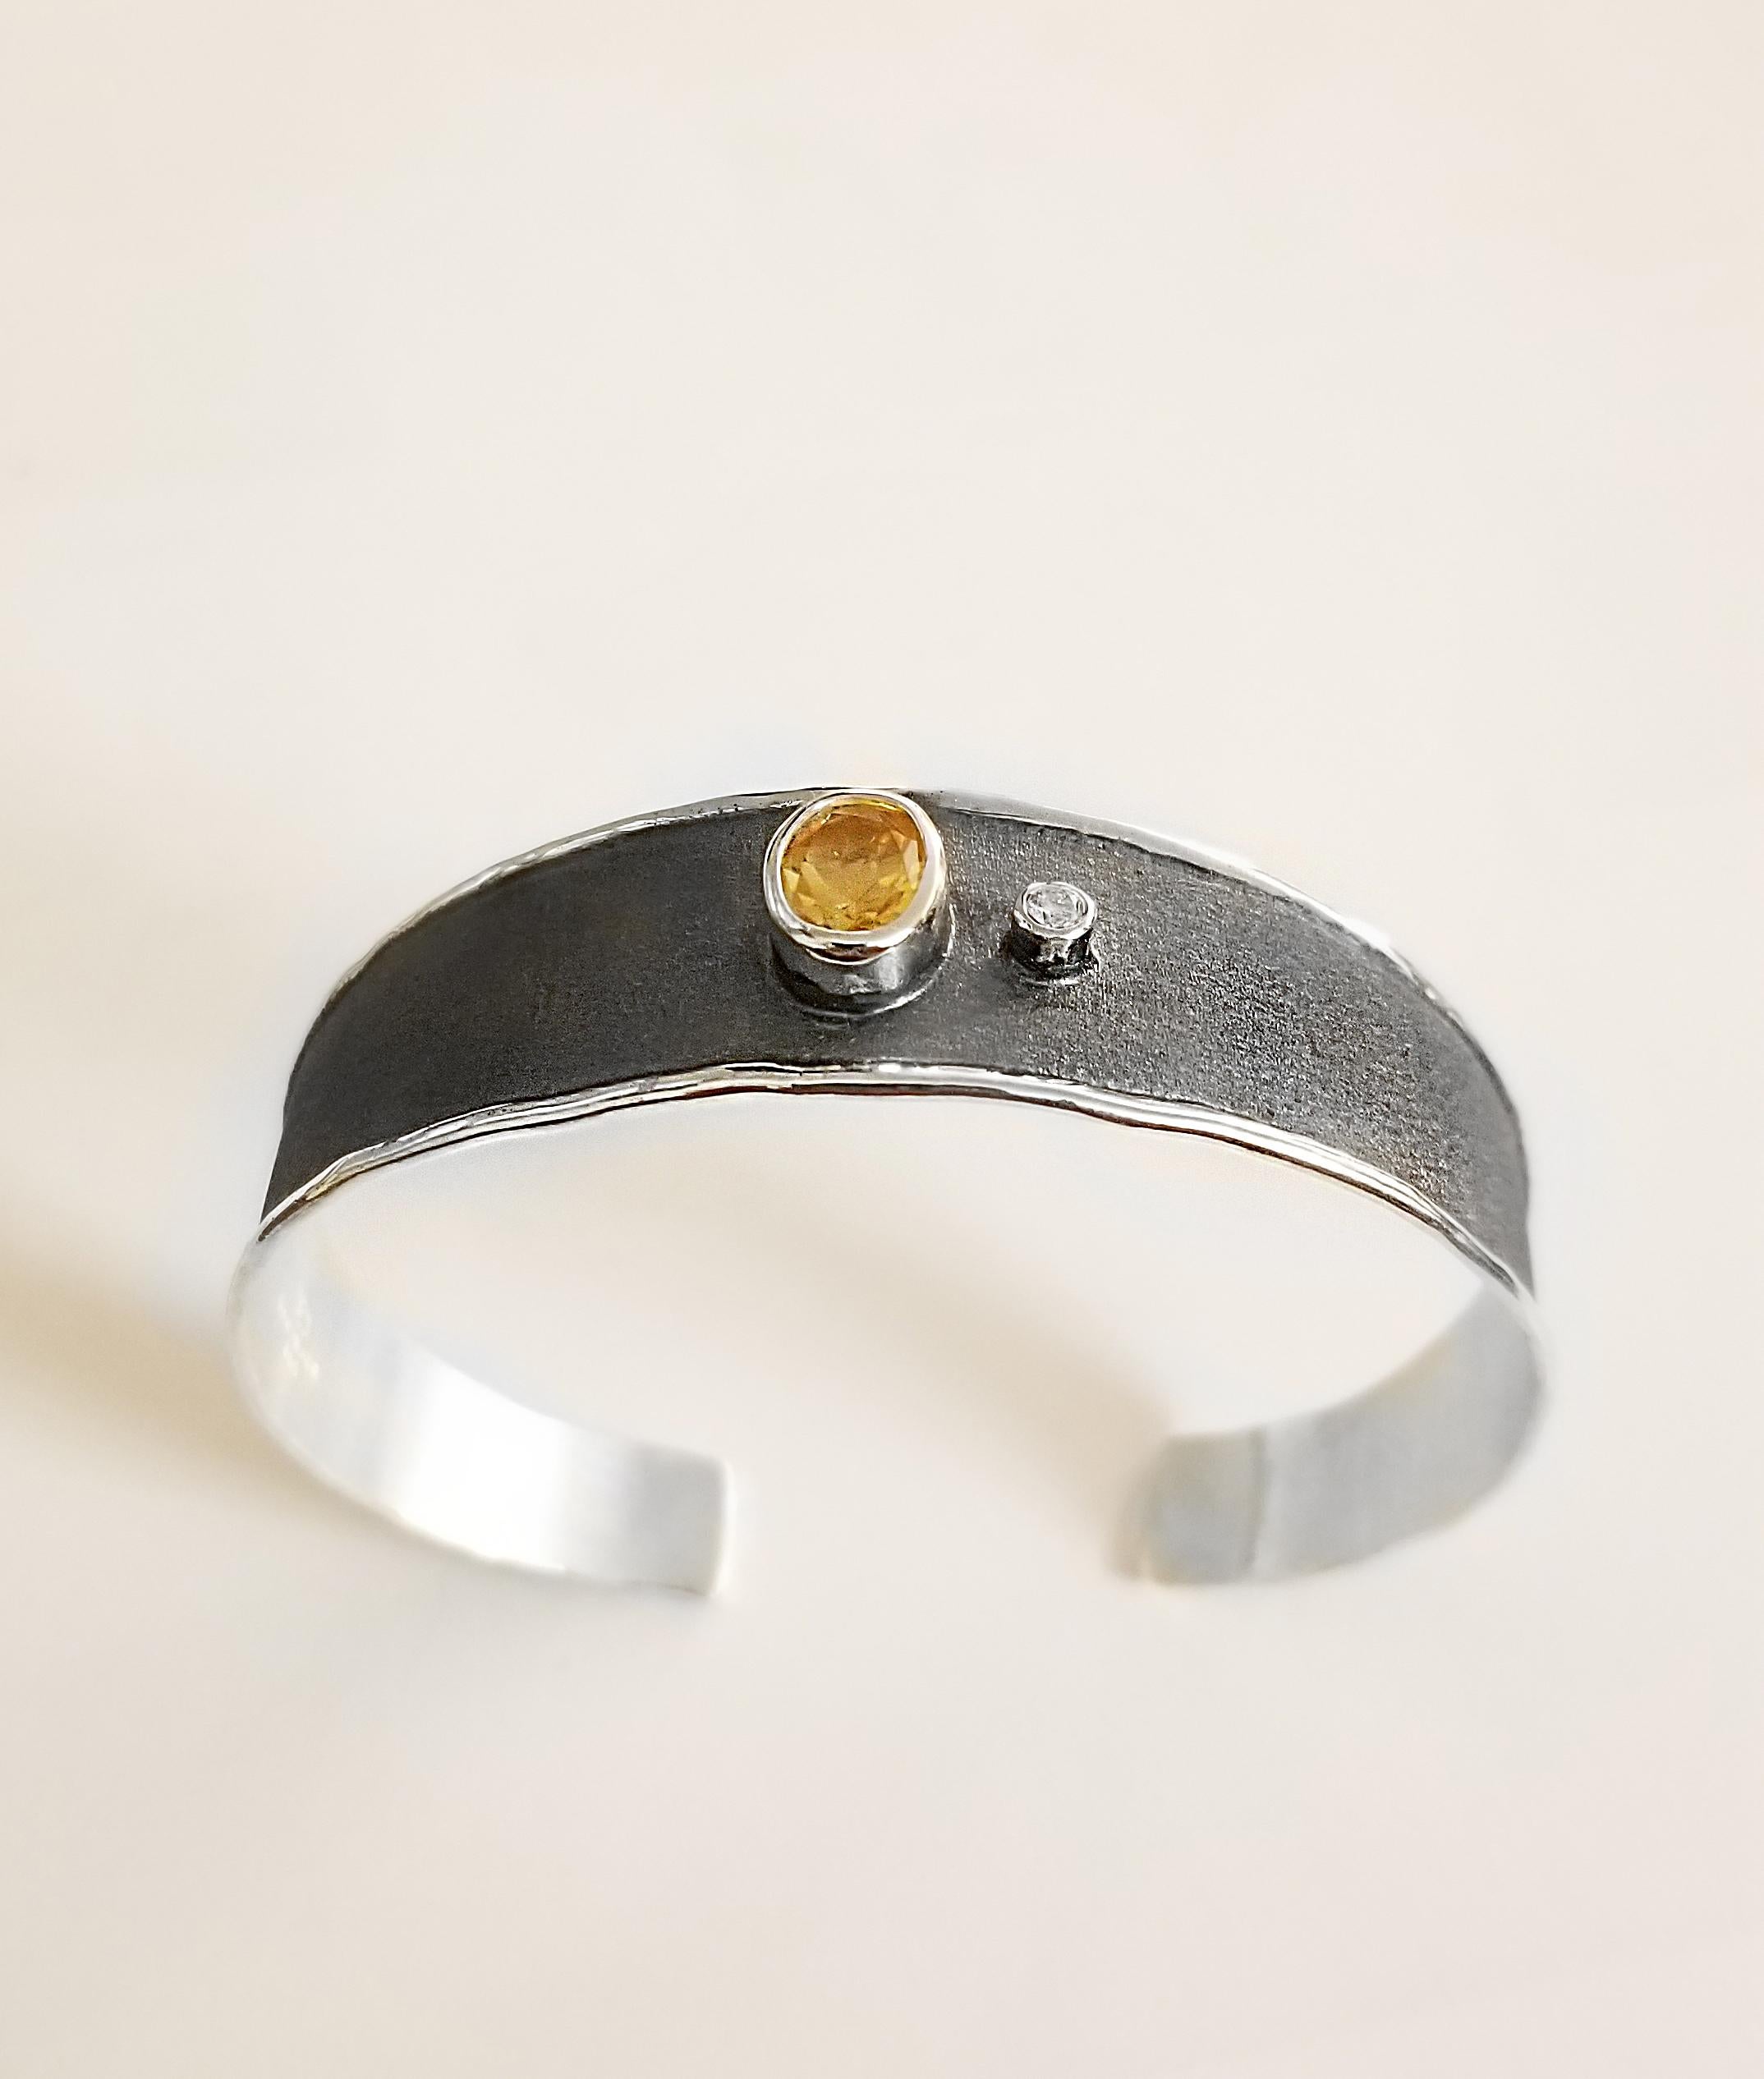 Yianni Creations Hephestos Collection 100% Handmade Artisan Bangle Bracelet from Fine Silver featuring 1.25 Carat Oval Cut Citrine and 0.03 Carat Brilliant Cut Diamond contrasting on Black Oxidized Rhodium background. Gems get complemented by the